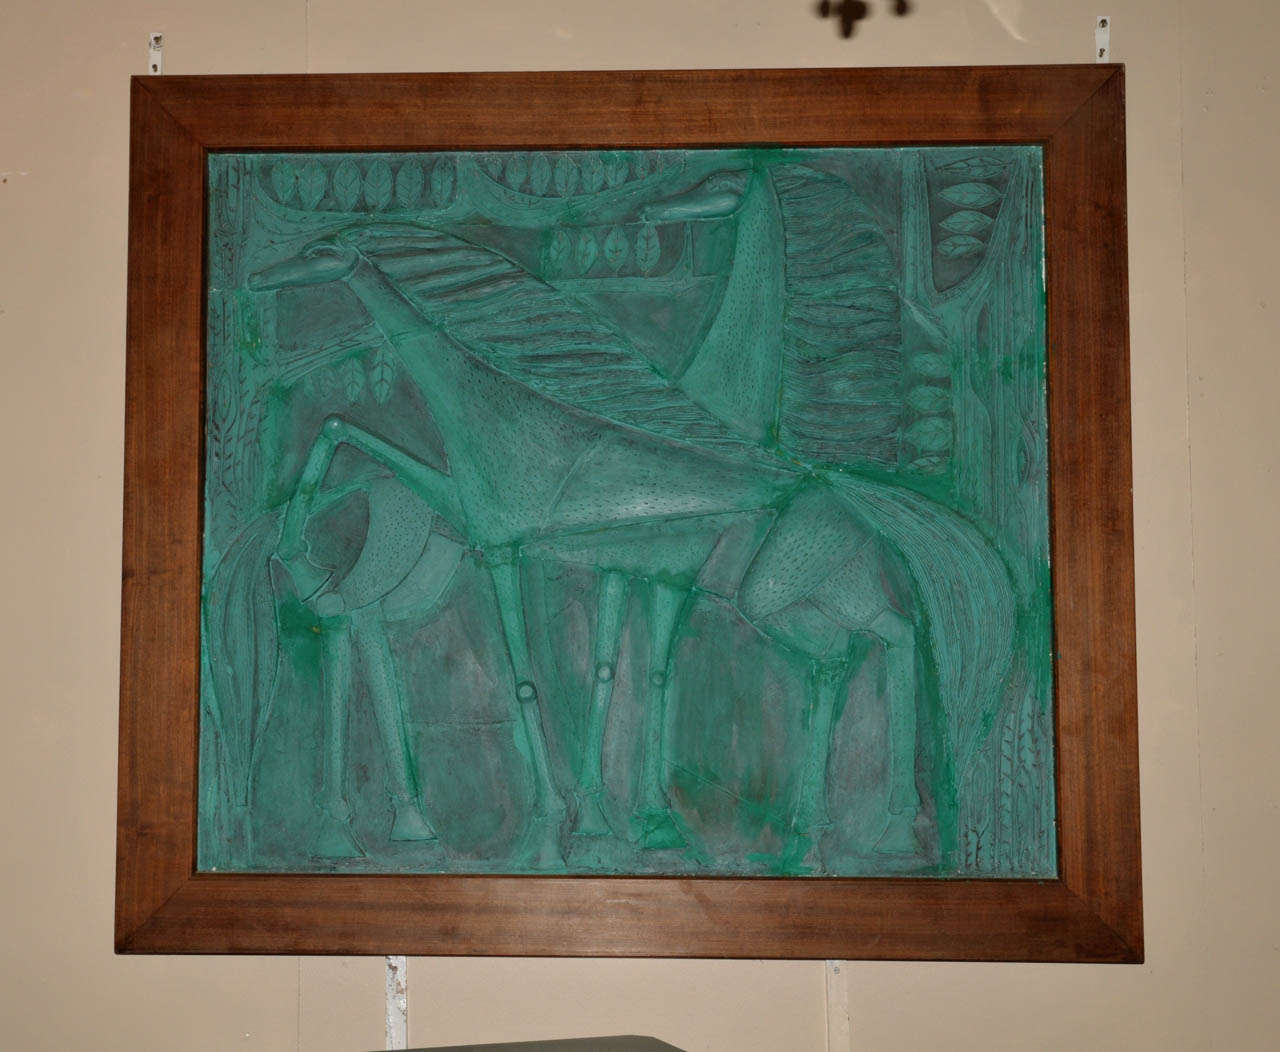 1950's bas-relief. Green patinated plaster. Non original (1970's) wood frame. Country of origin: North Europa. Good condition. Normal wear consistent with age and use.